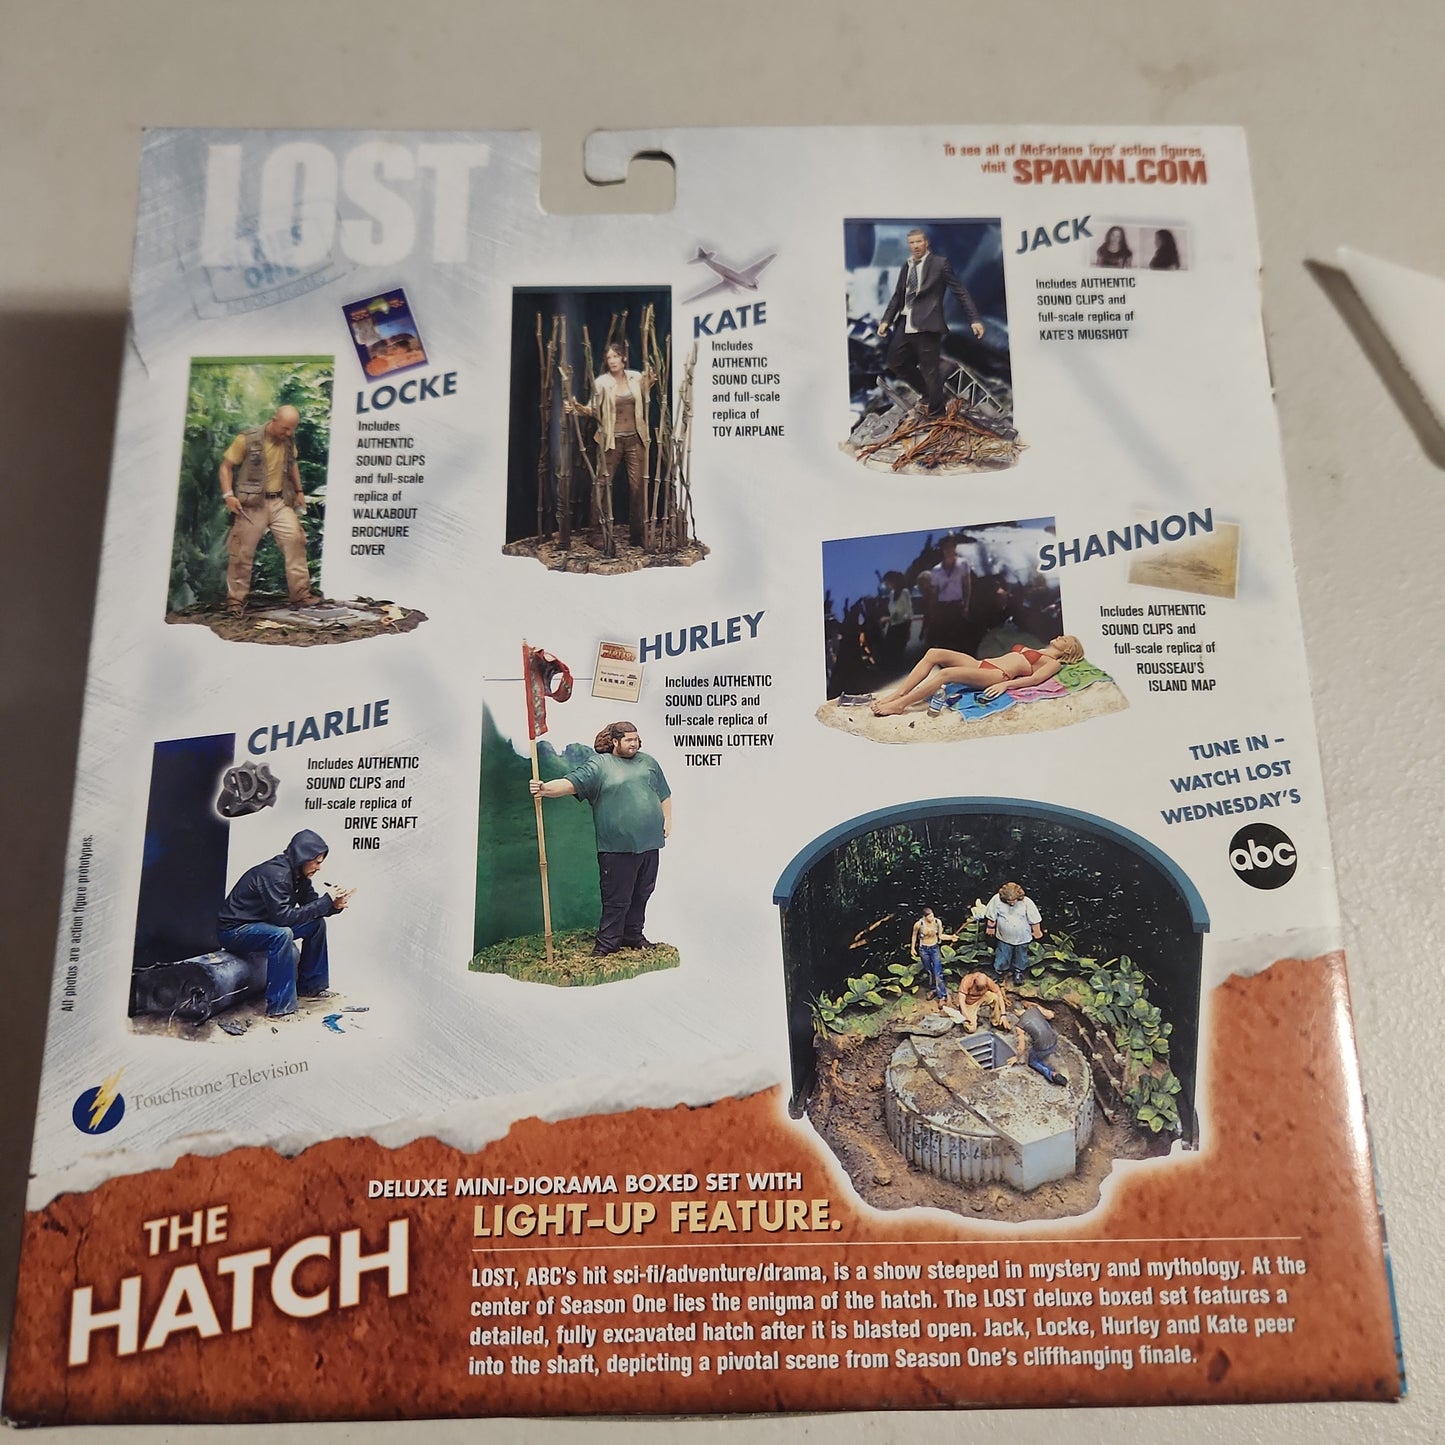 McFarlane Toys KATE 6" Figure Lost TV Series 1 With Sound & Props 2006